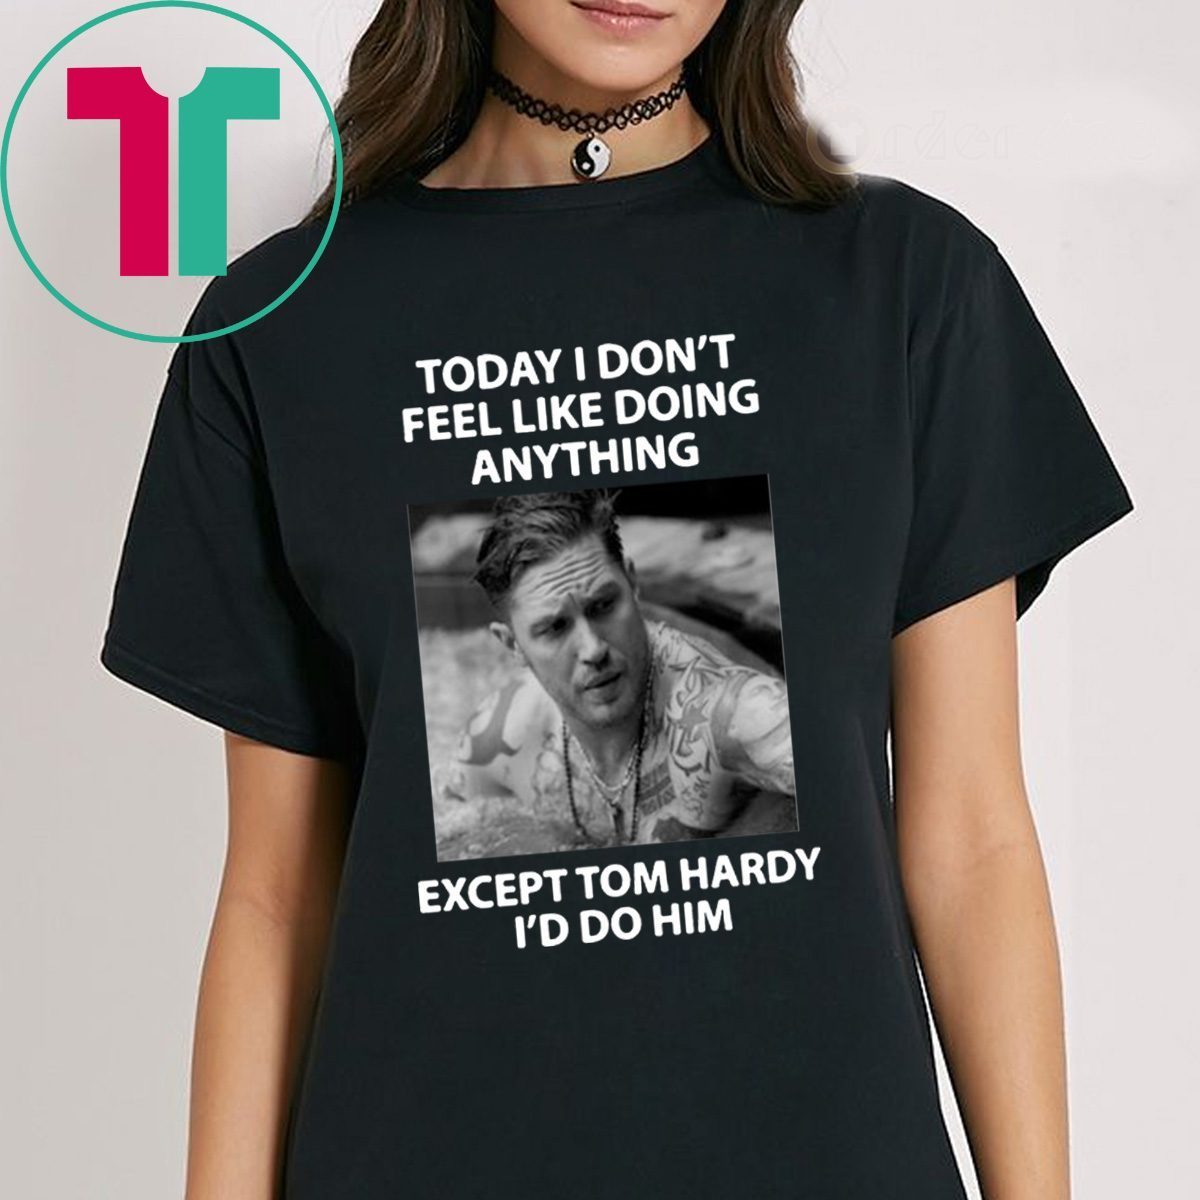 Today I don't feel like doing anything except Tom Hardy I'd do him tee ...